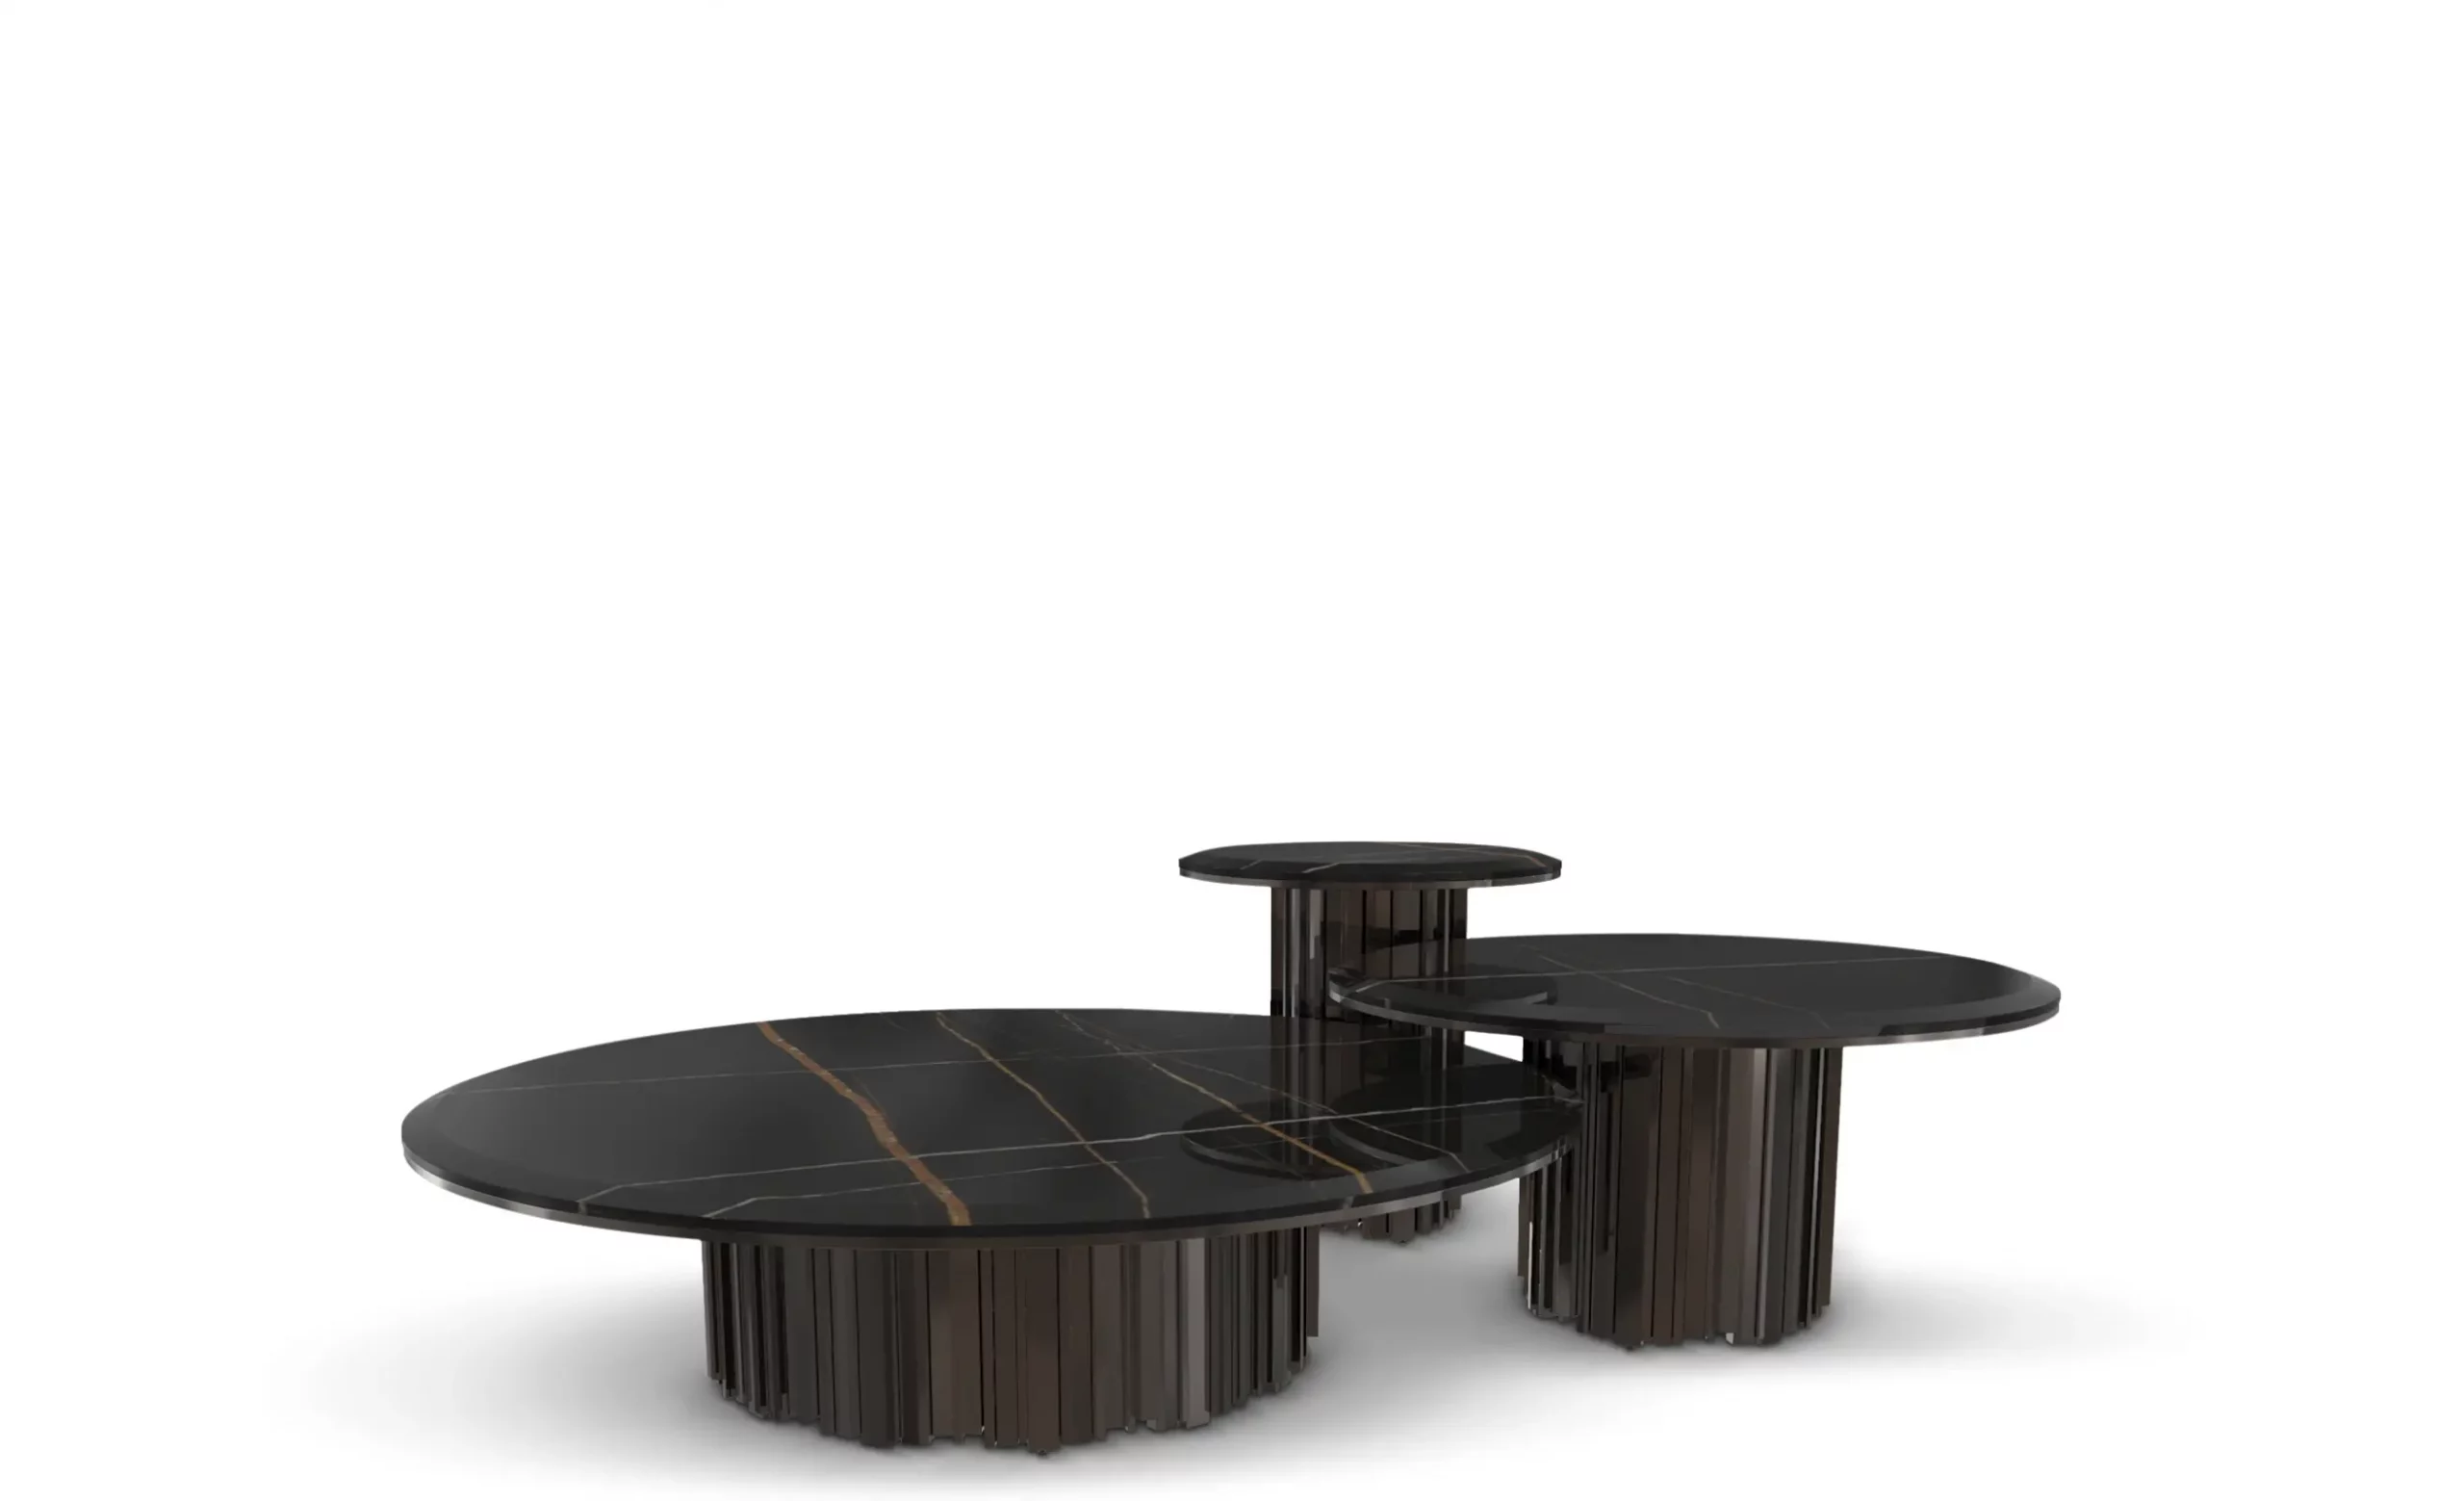 3 Layer Solid Black Table